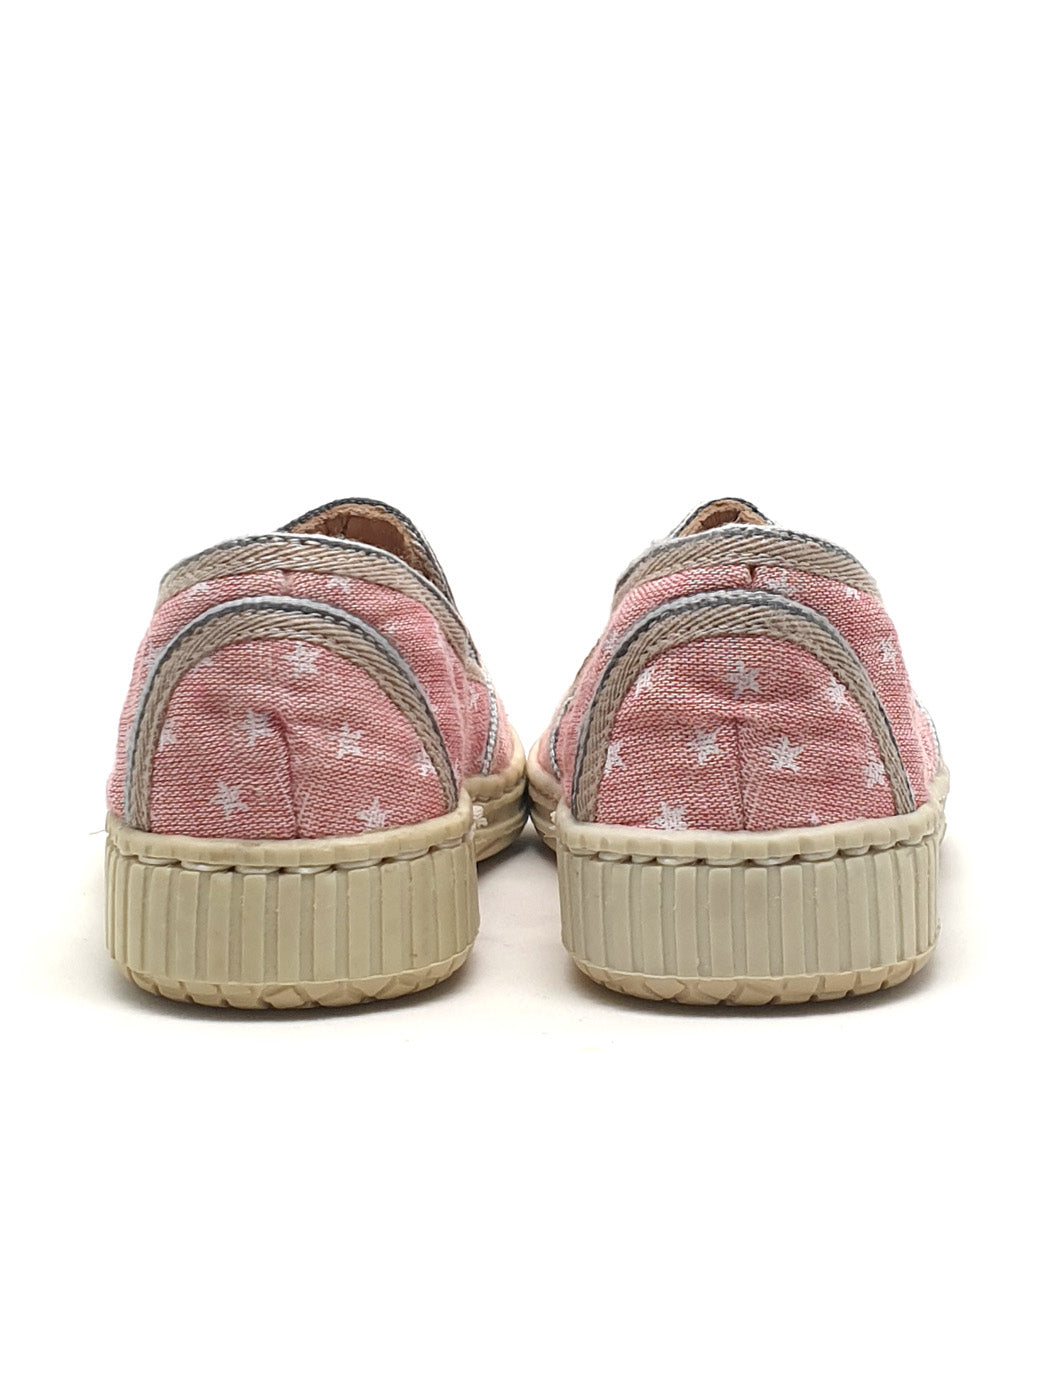 Baby's shoe sneaker for Boy-DC013 pink